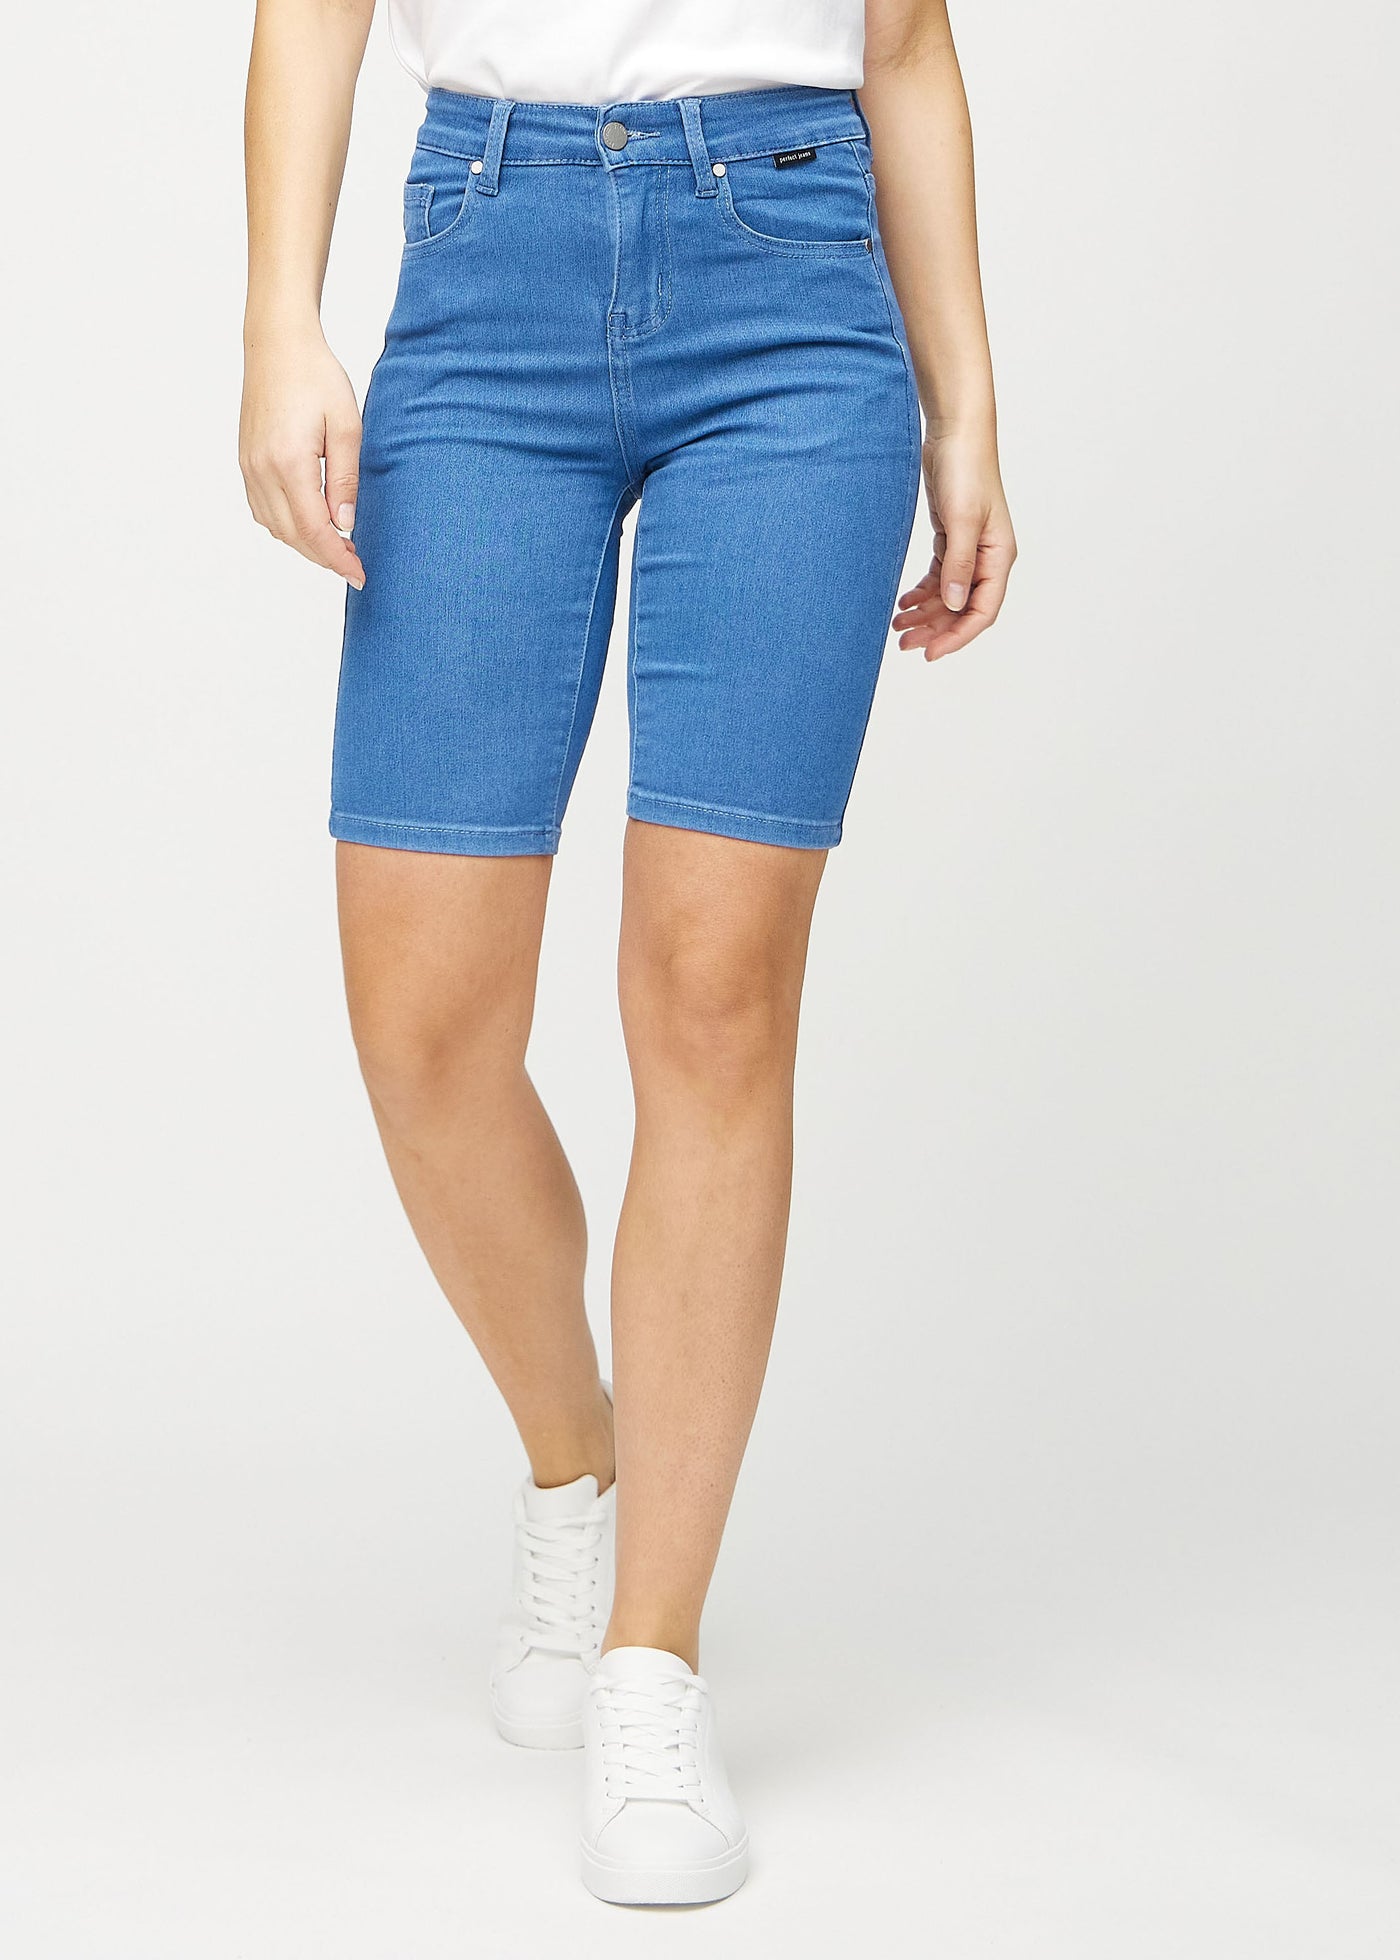 Perfect Shorts - Middle - Skinny - Geraniums™